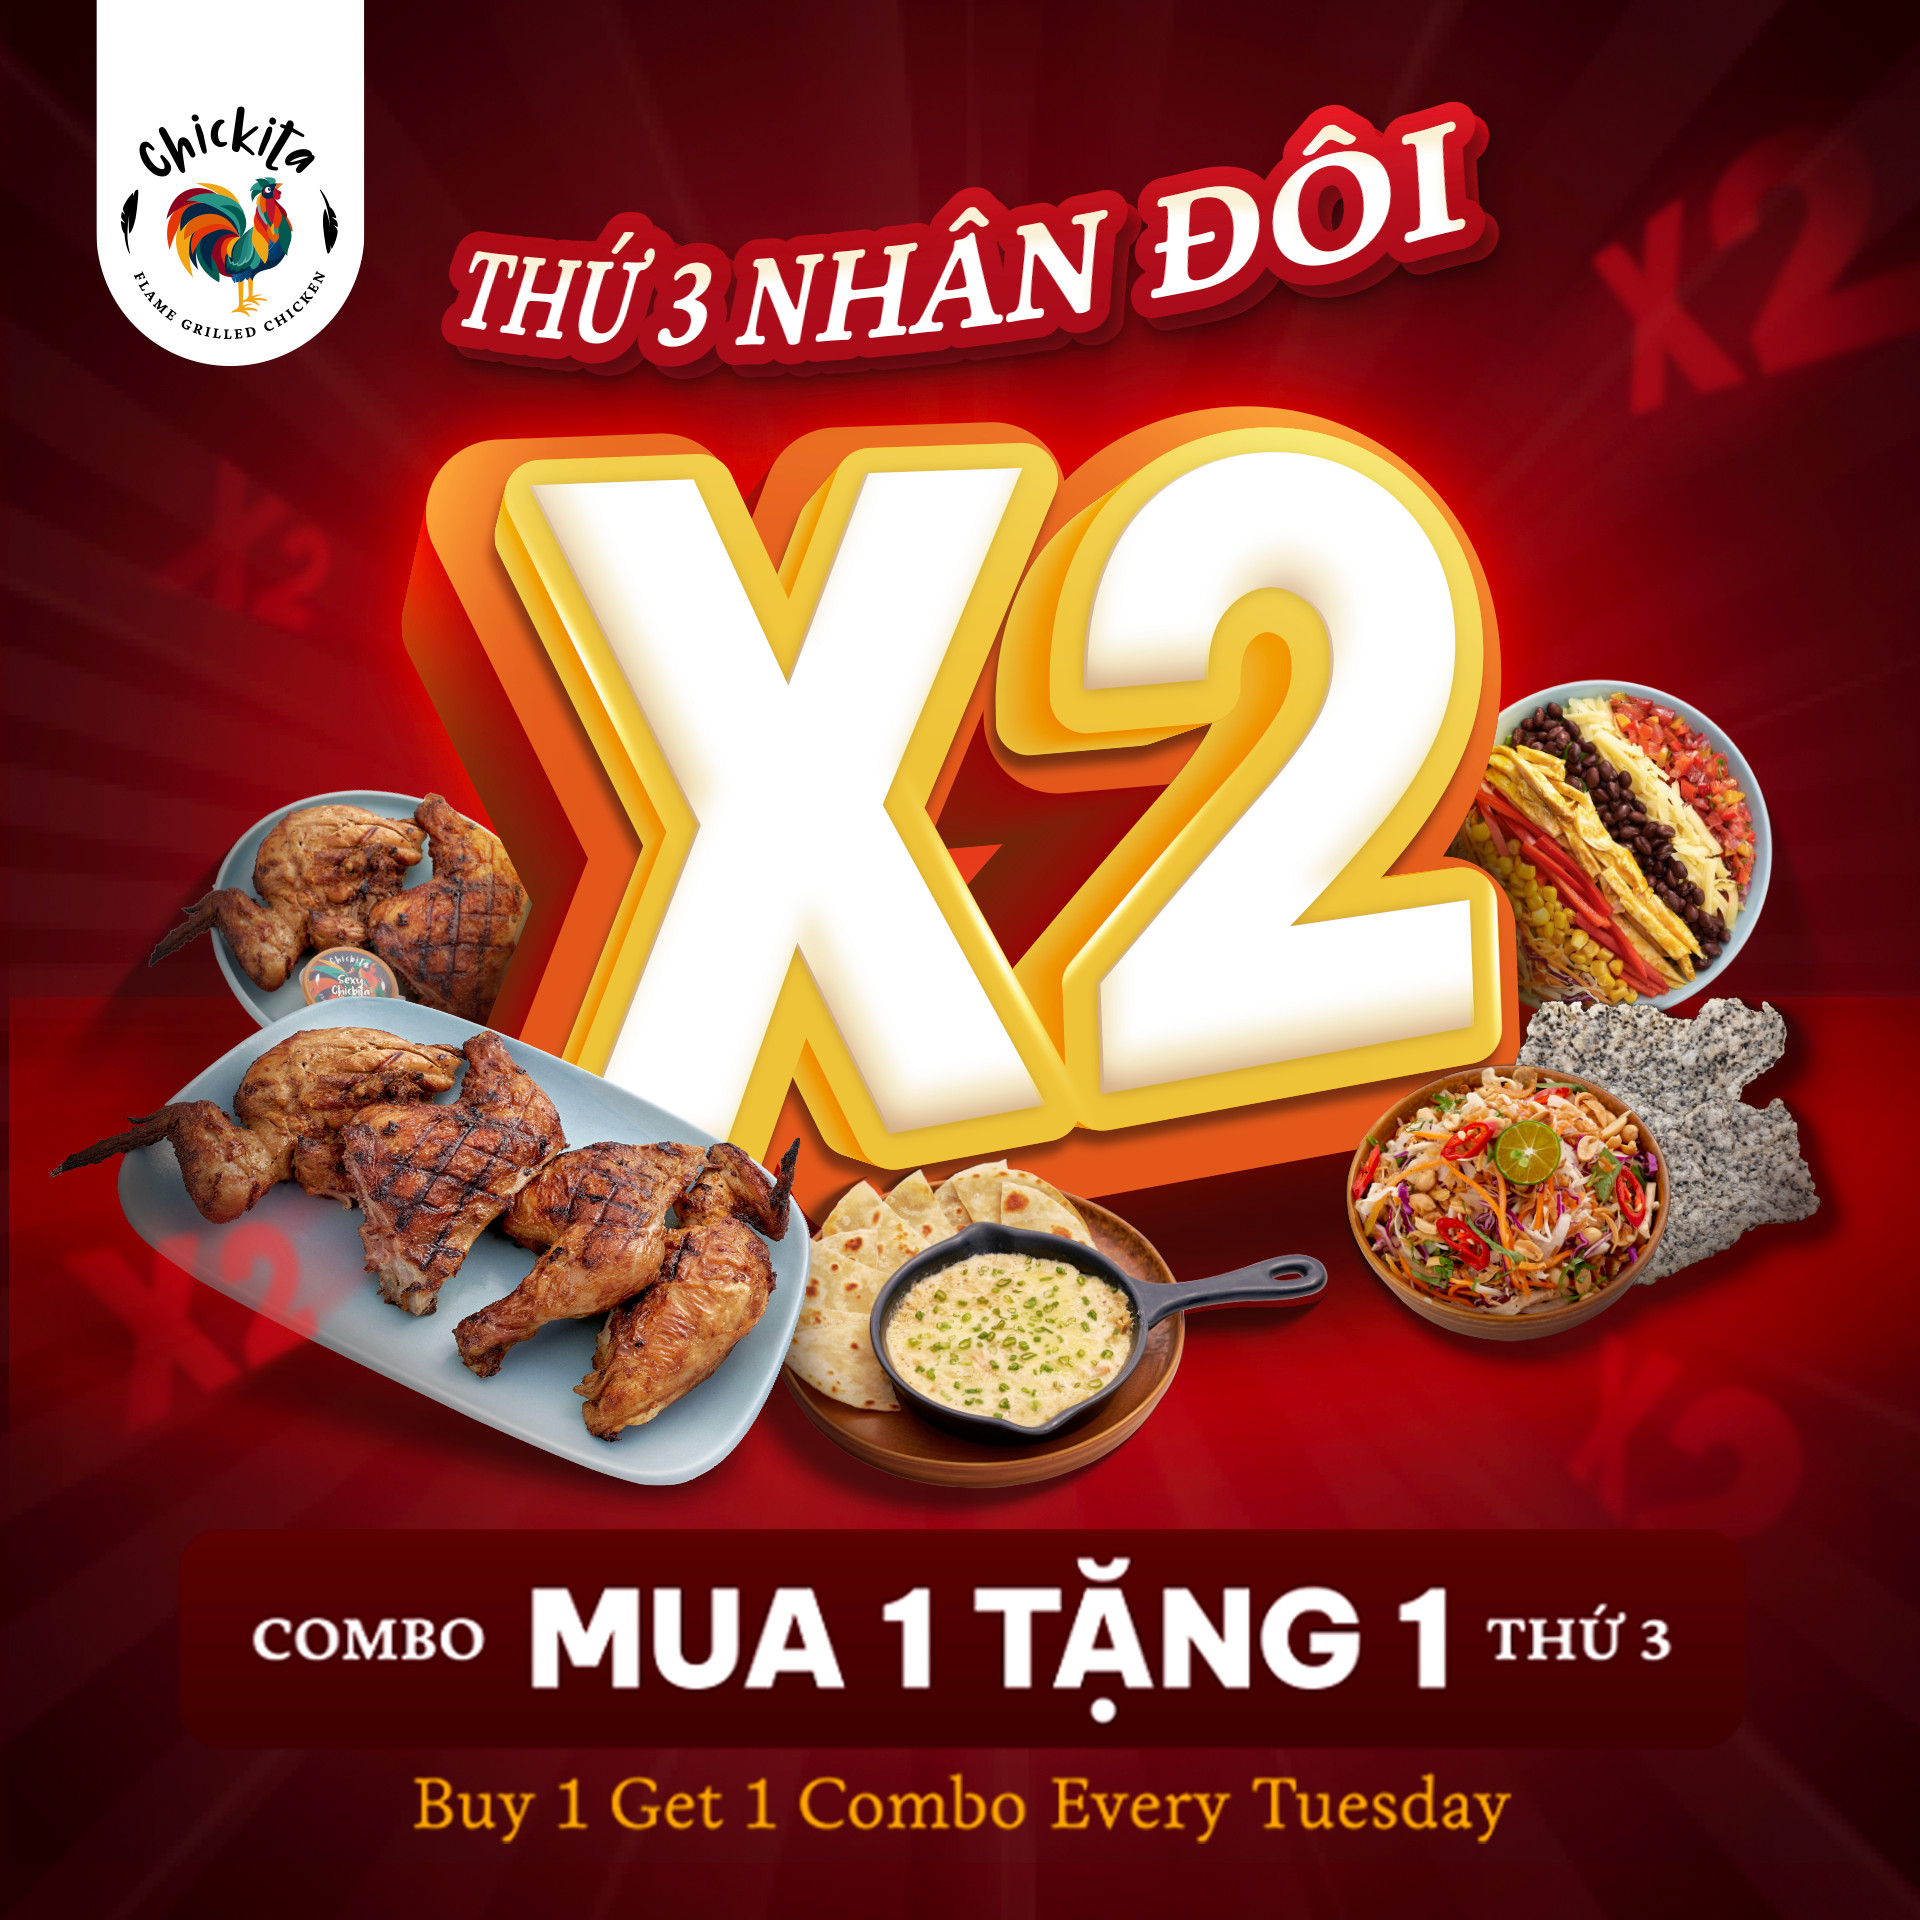 Buy 1 Get 1 - Times Two Tuesday